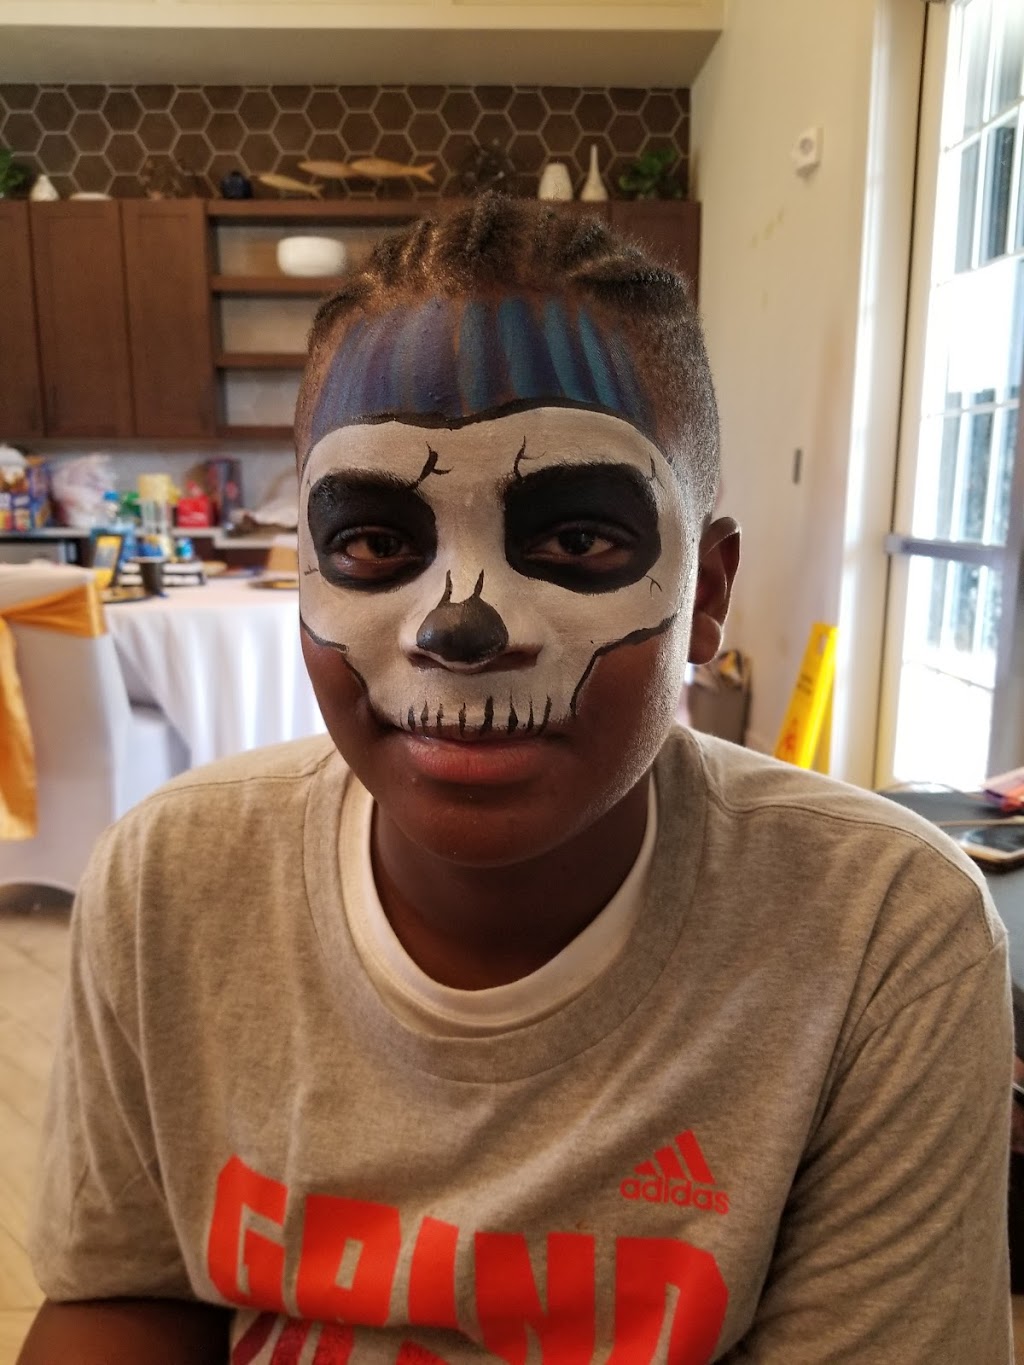 LeeLees Face Painting | 10602 Taylor Rd, Thonotosassa, FL 33592 | Phone: (813) 708-4484